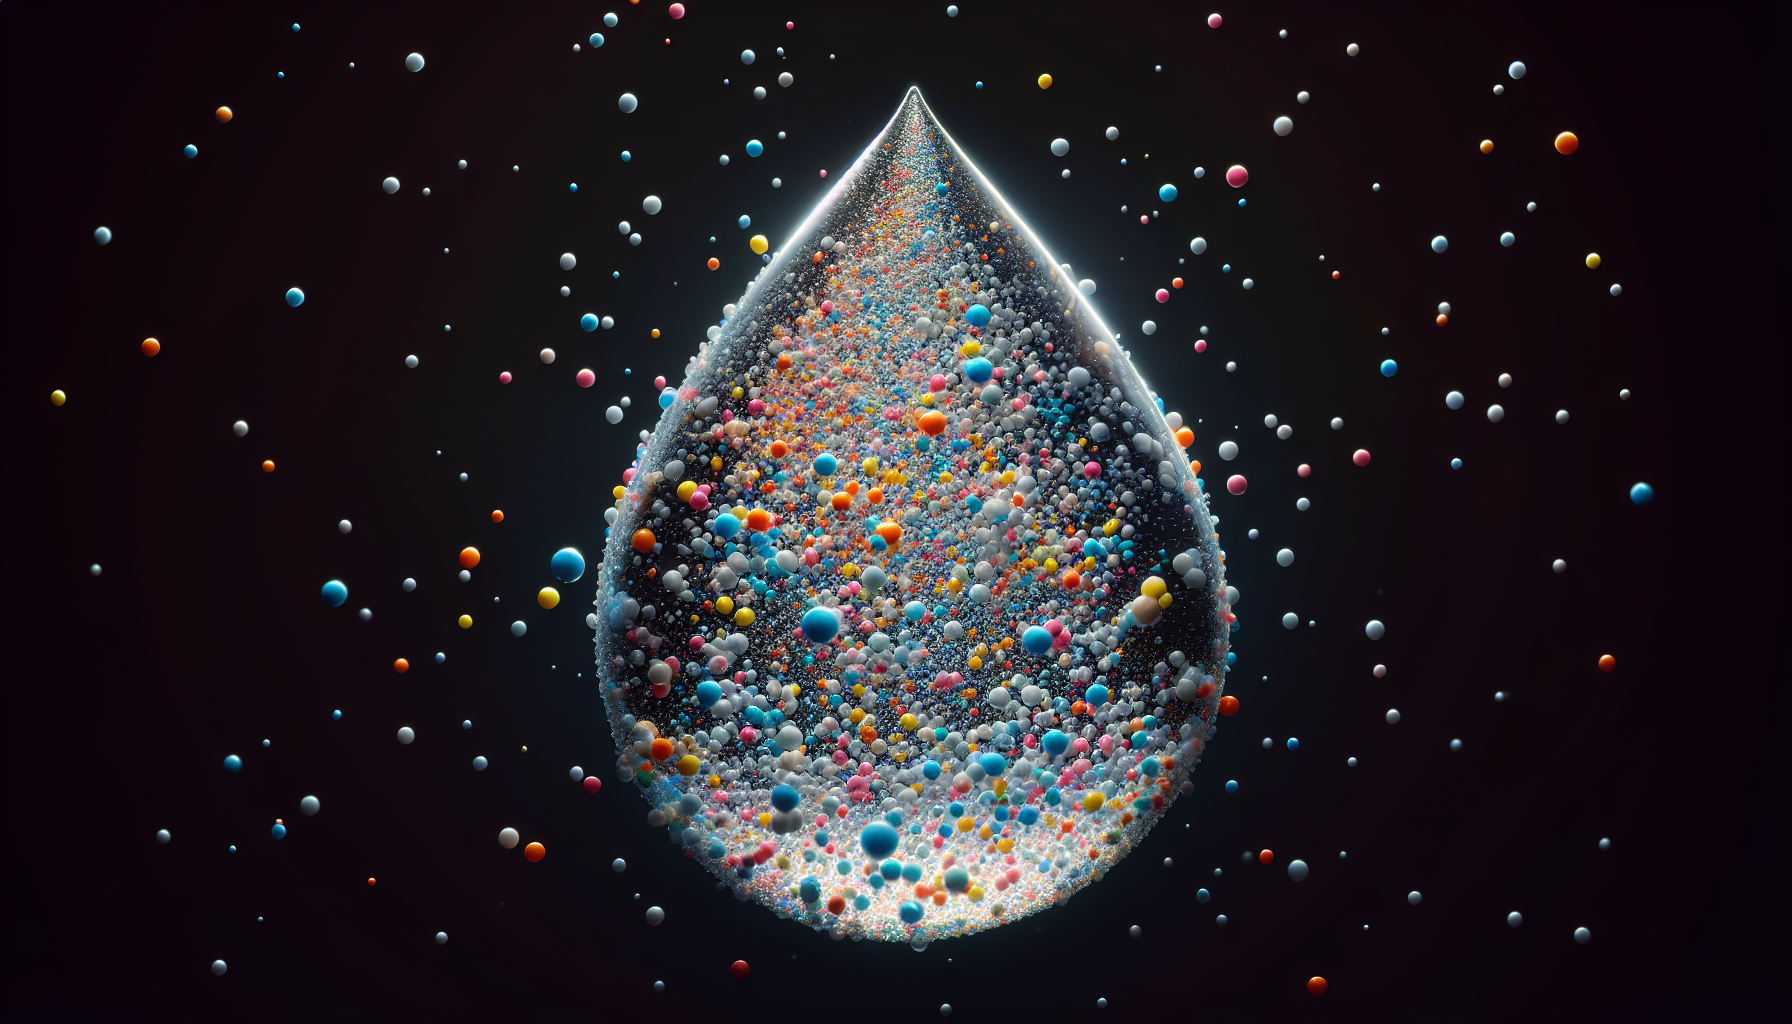 What Treatment Methods Are Effective For Well Water With High Levels Of Microplastics?